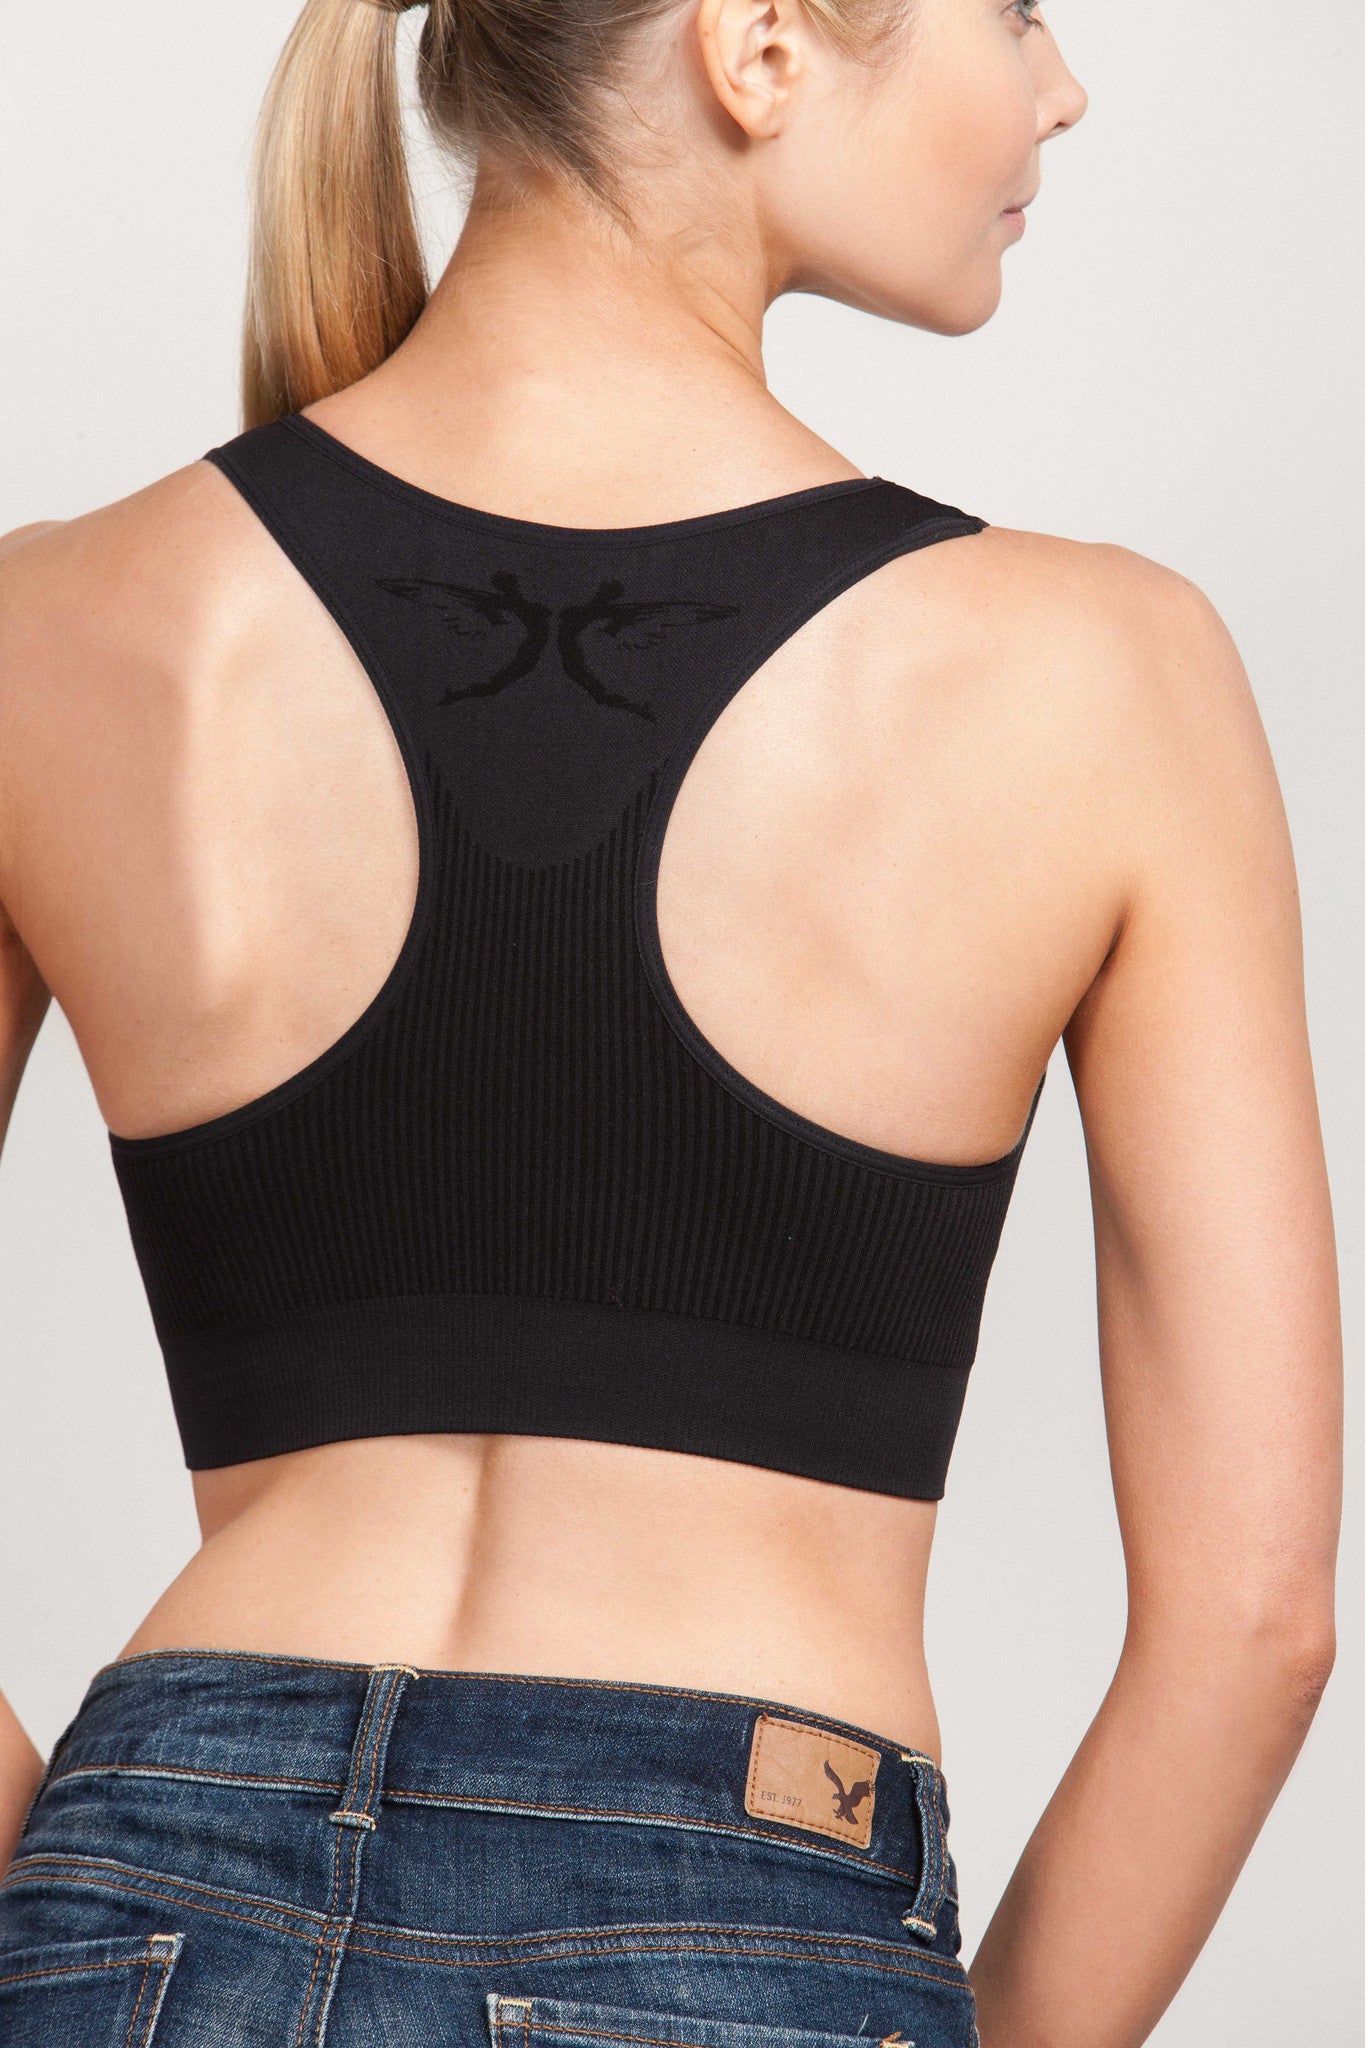 The Breast Whisperer Bra for Augmented Women in Black Back Closeup